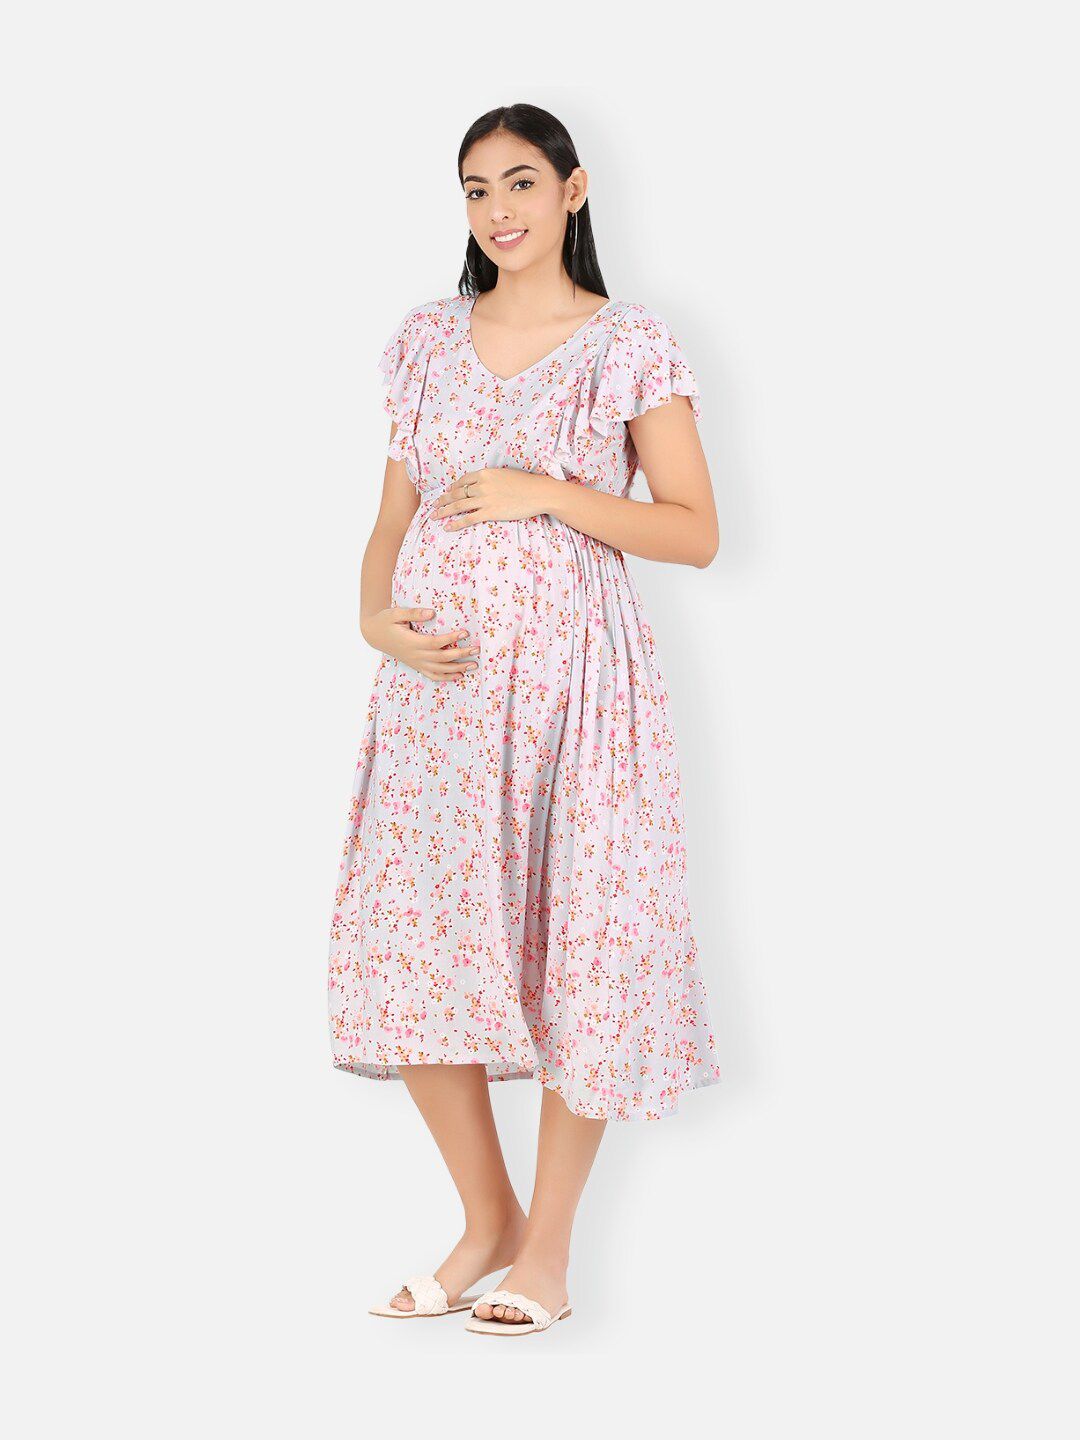 MYLO ESSENTIALS Grey & Pink Floral Maternity Midi Dress Price in India